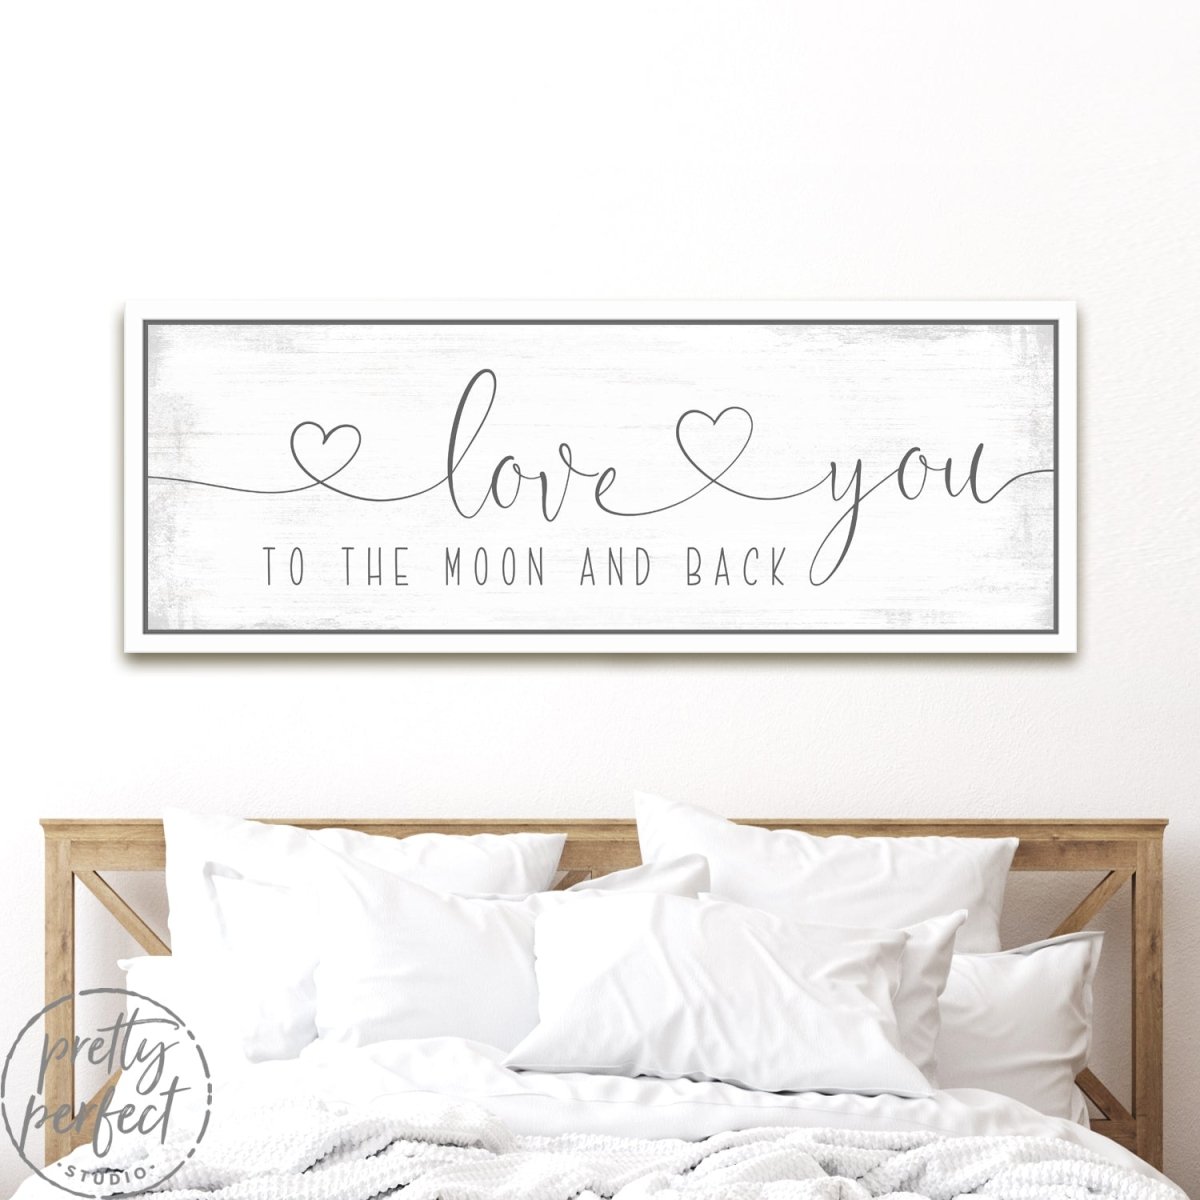 Love You to the Moon and Back Sign With Hearts Above Headboard - Pretty Perfect Studio